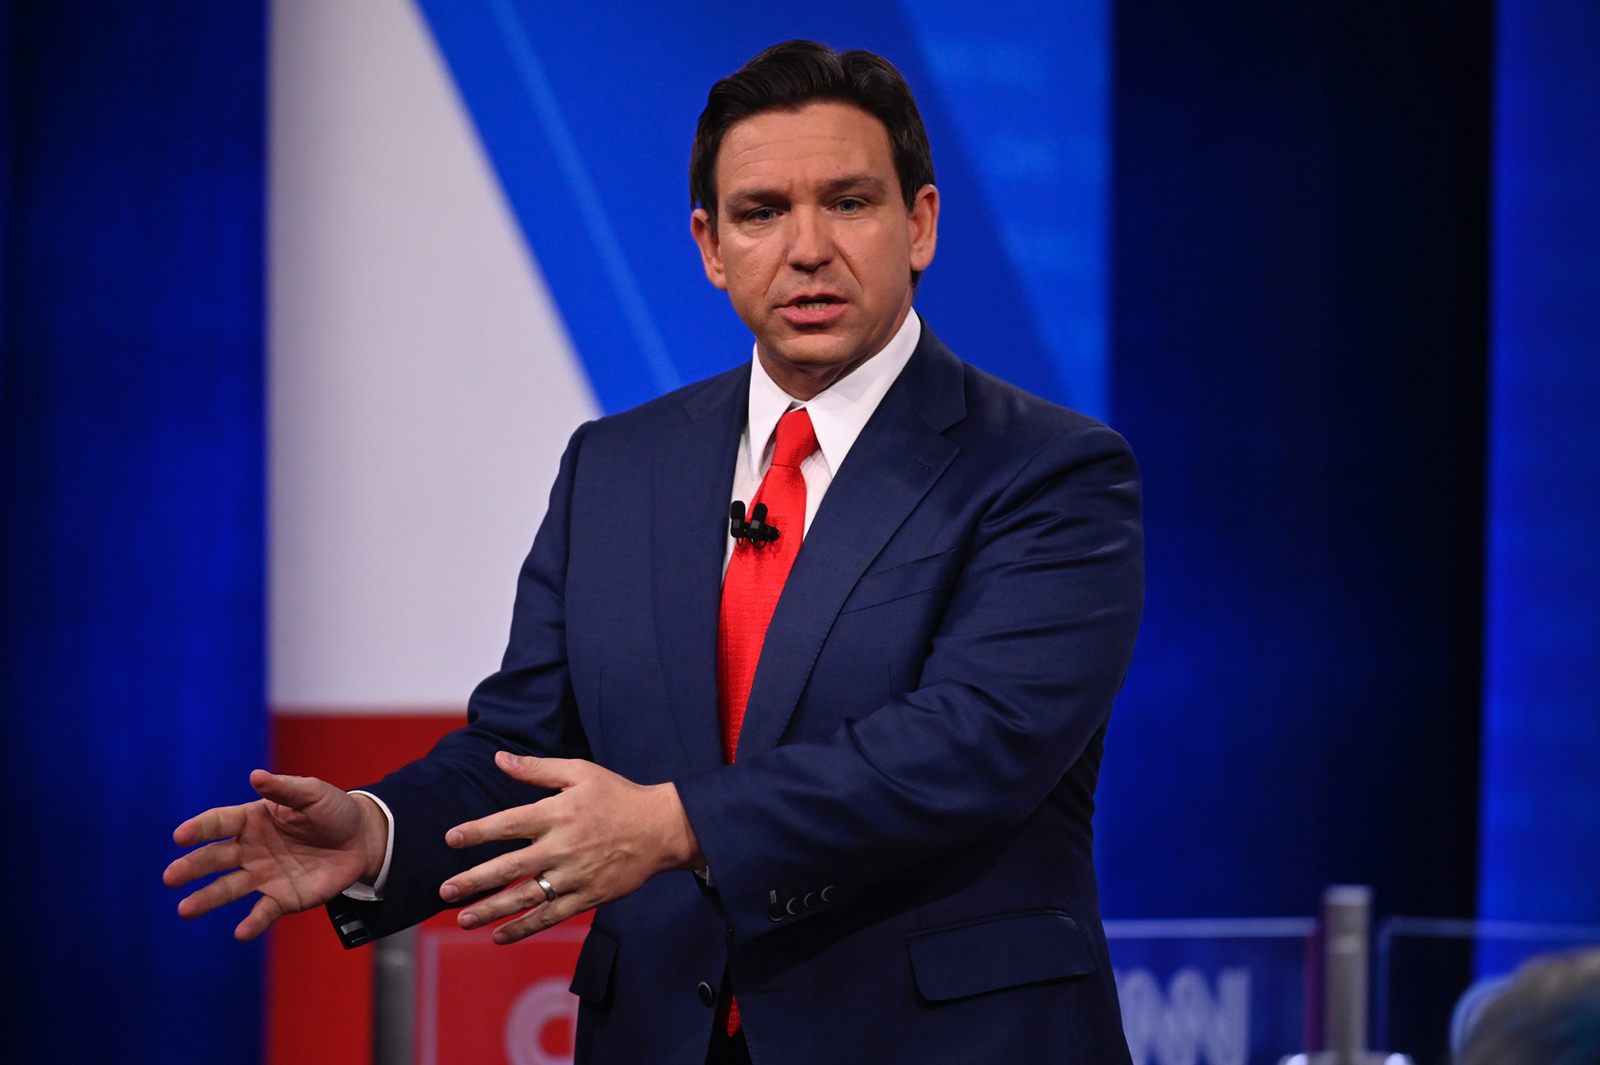 DeSantis gestures as he speaks during CNN's Republican Town Hall on Tuesday.